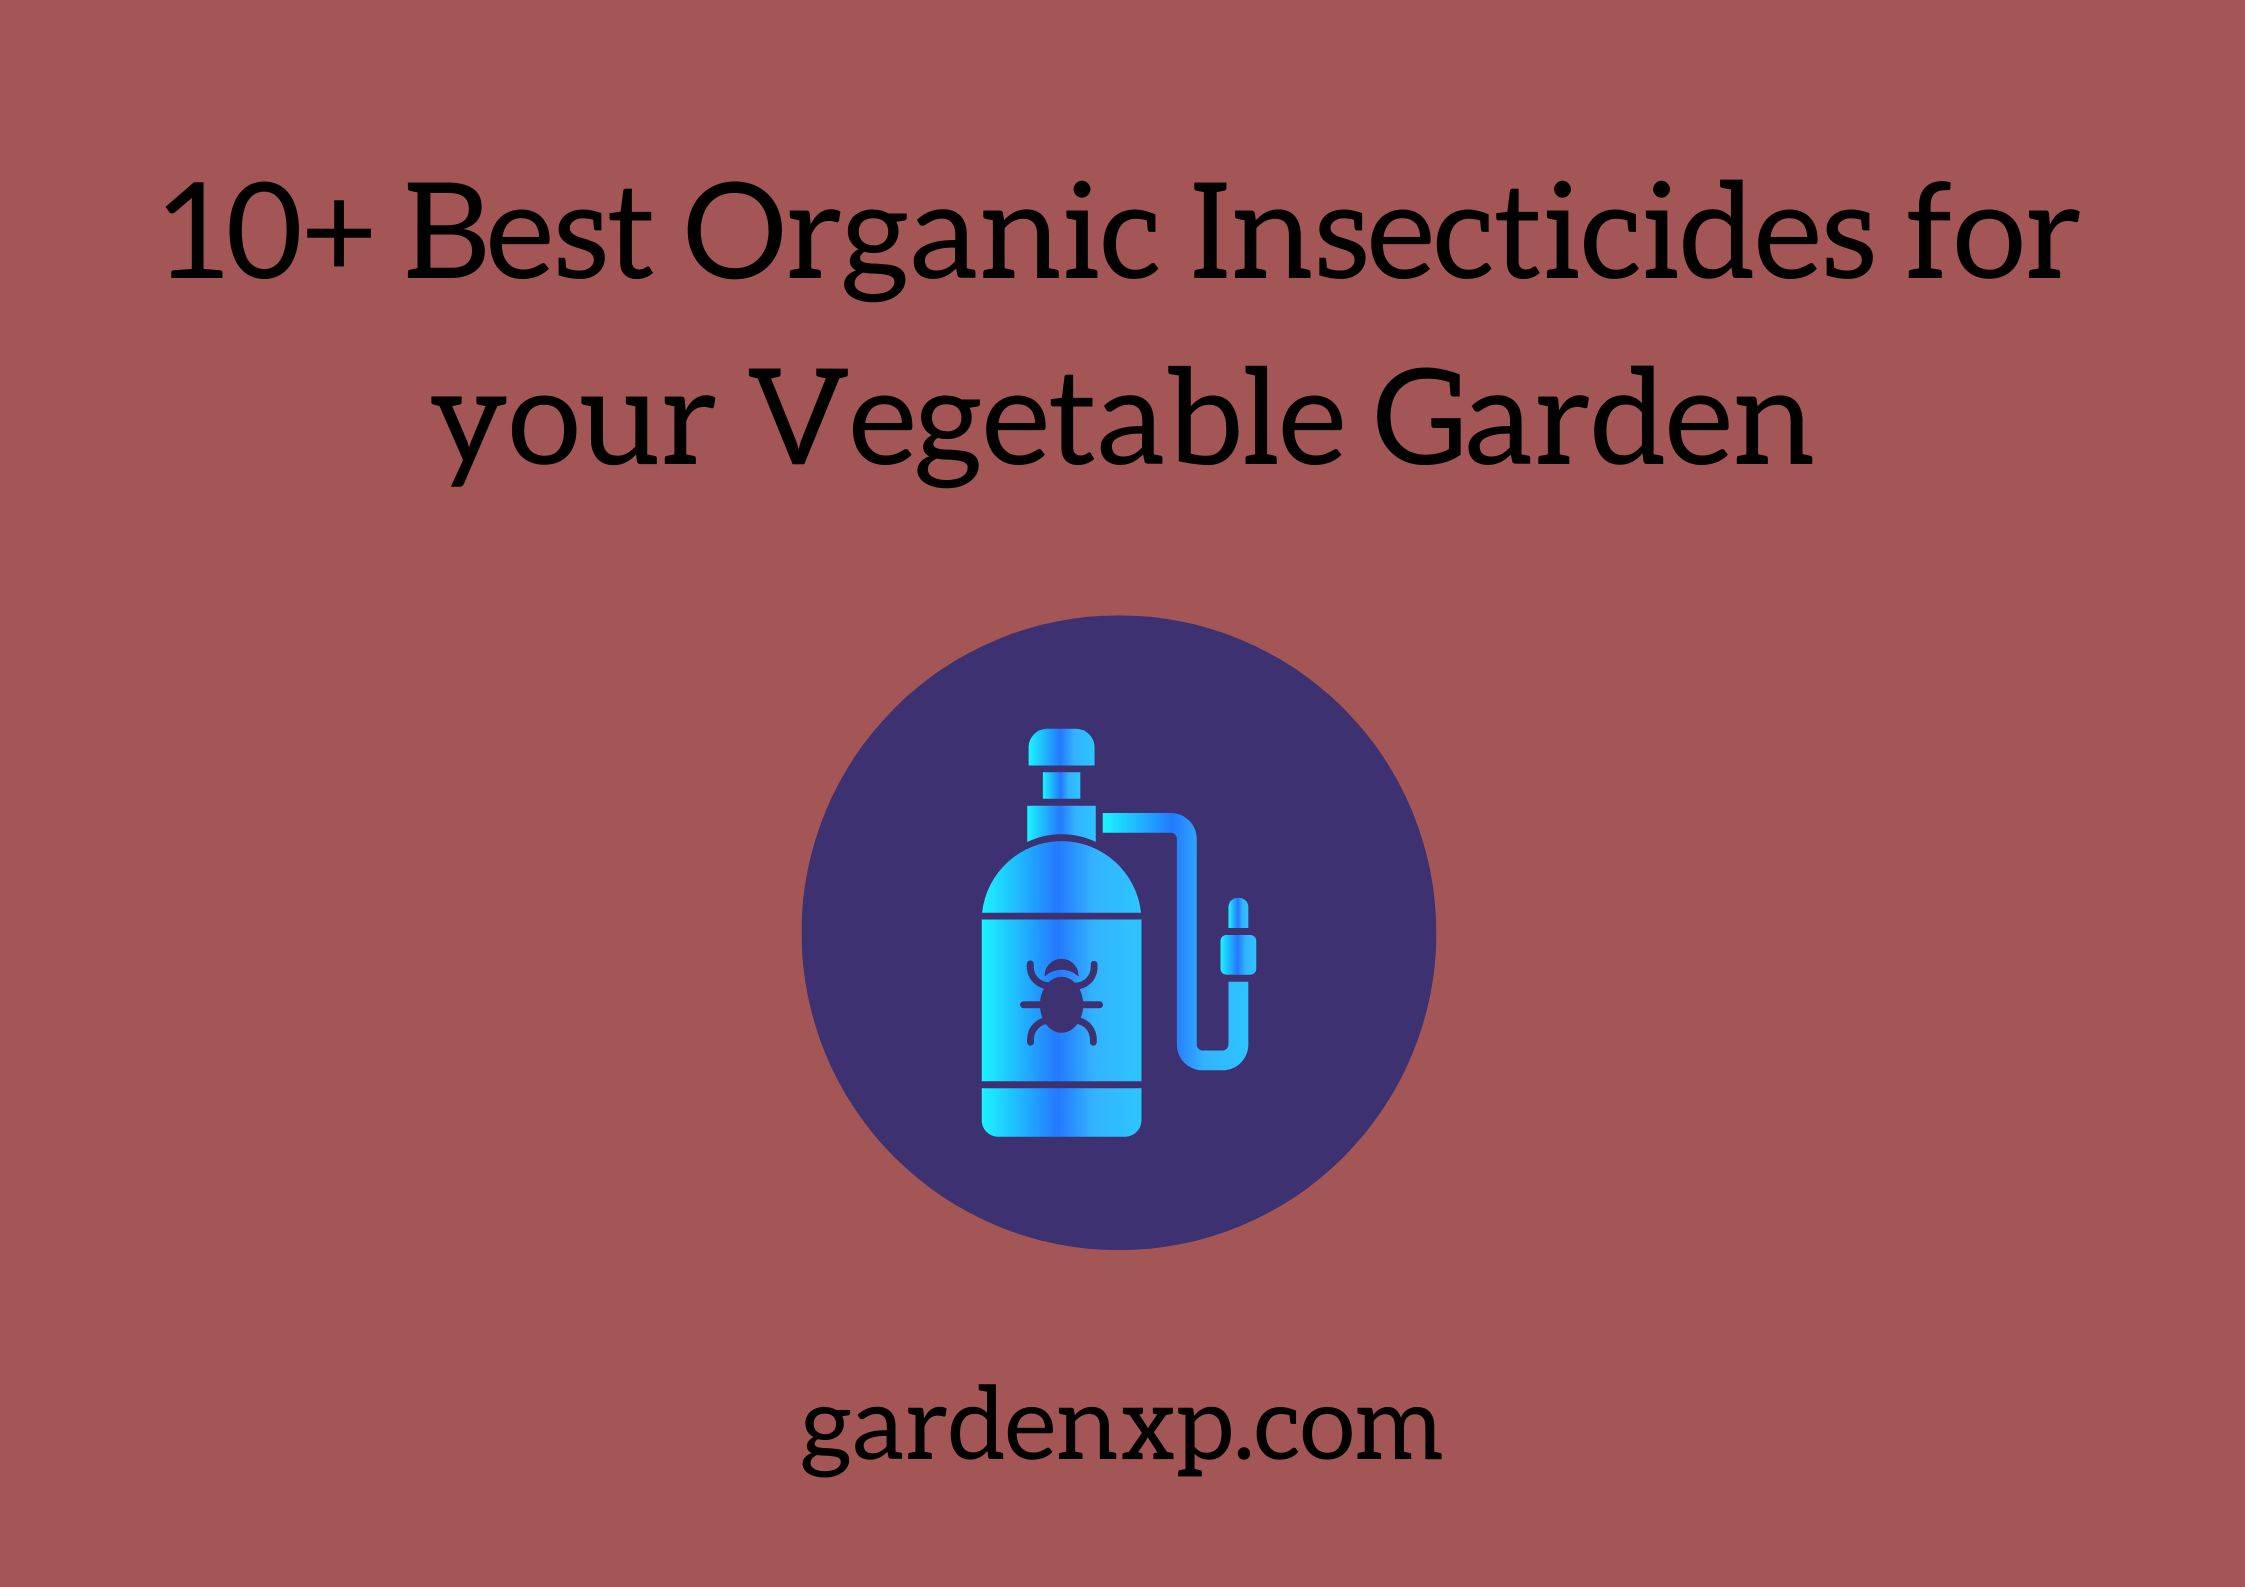 10+ Best Organic Insecticides for your Vegetable Garden